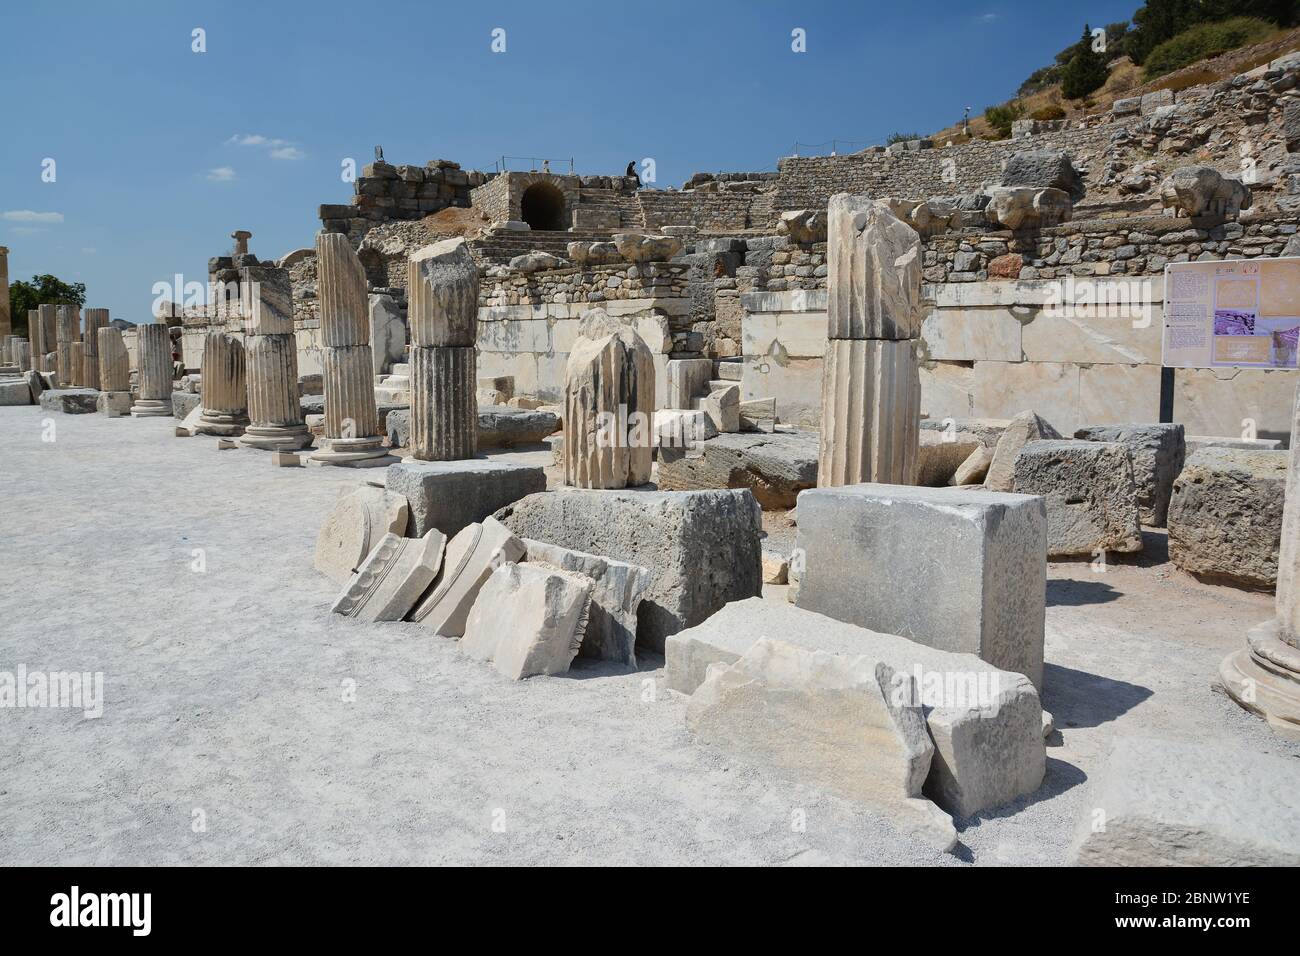 The ruins of the ancient city of Ephesus in Turkey. Early Christian Basilica. Stock Photo